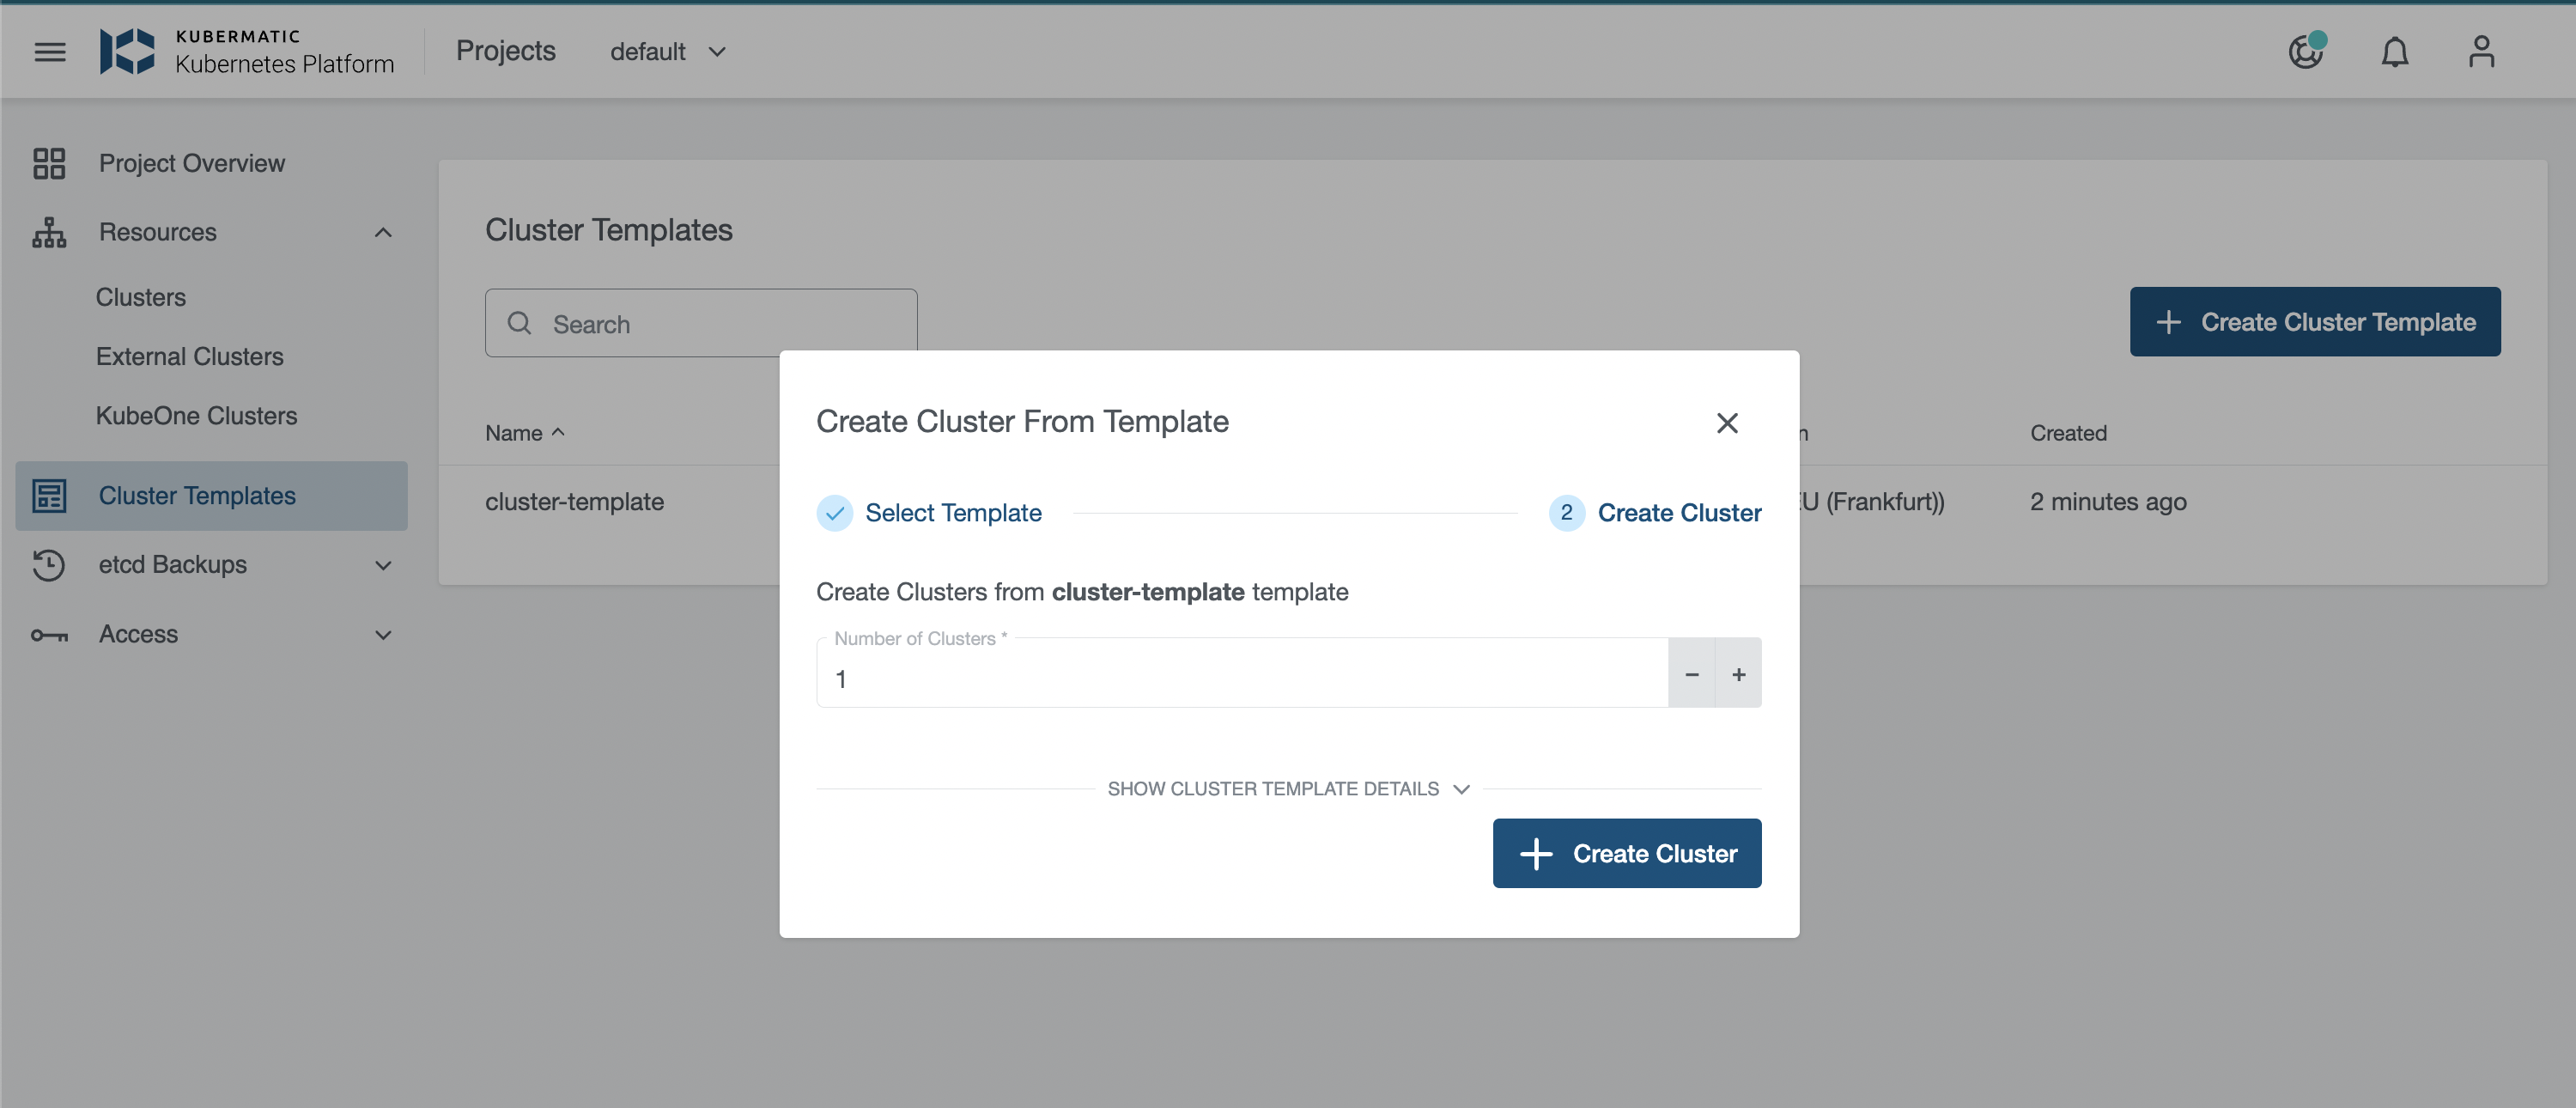 Create from cluster template wizard